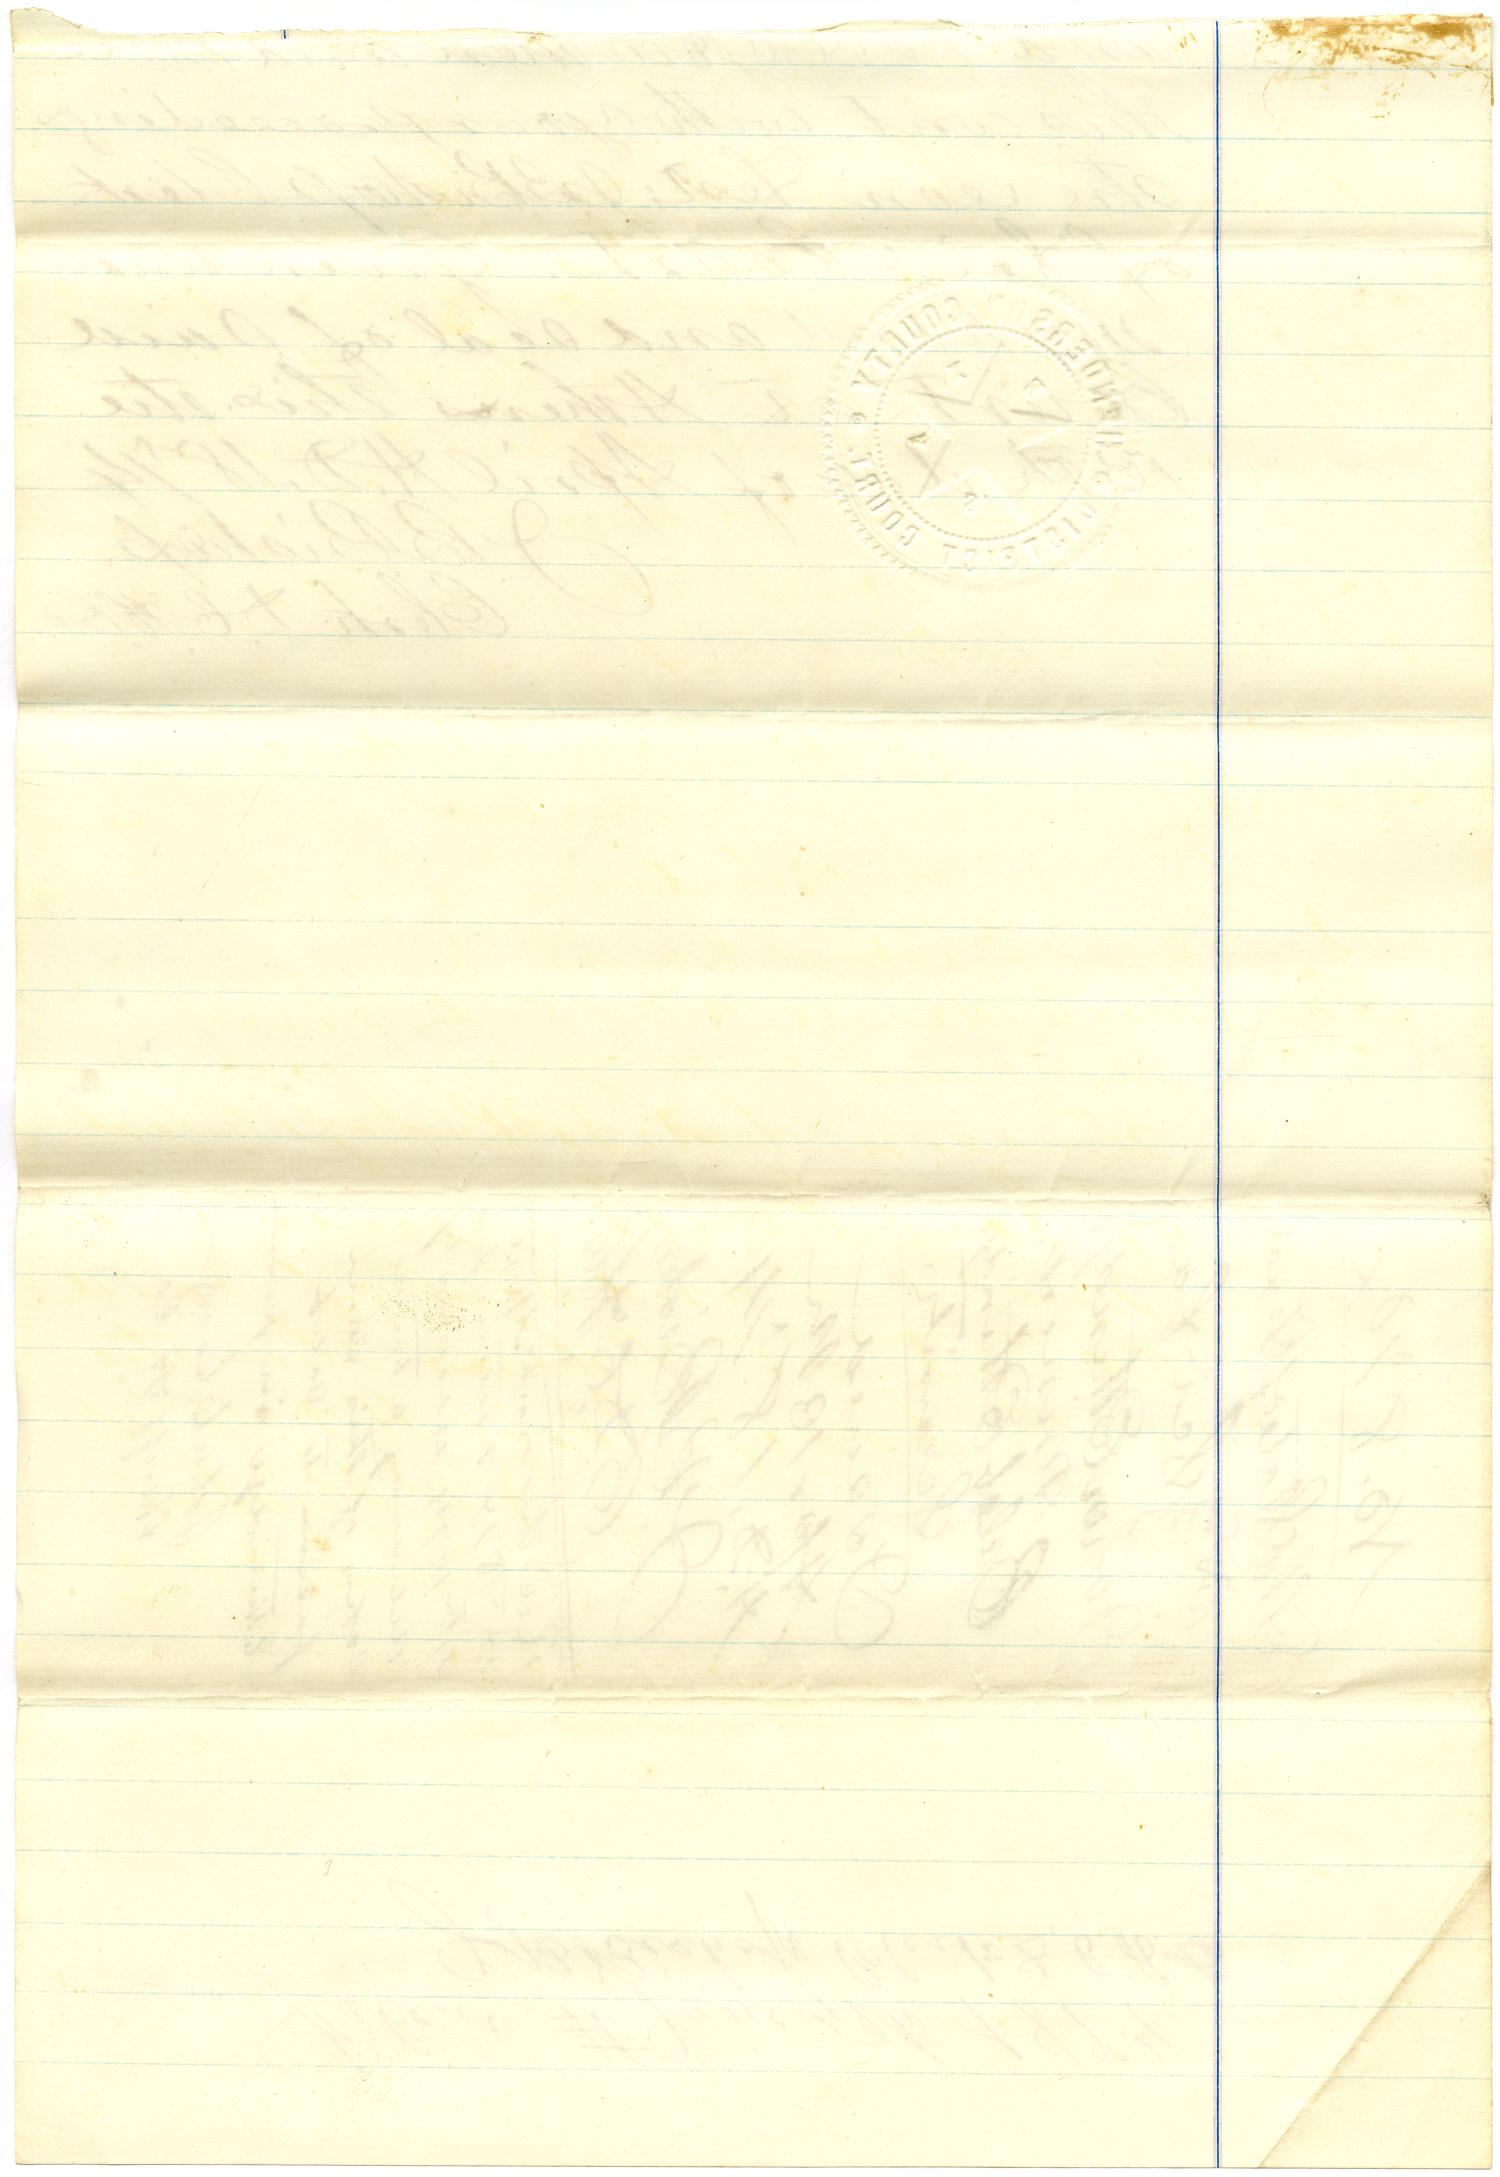 Documents related to the case of The State of Texas vs. John Etheridge, prin., and Caleb Etheridge, security, cause no. 870, 1874
                                                
                                                    [Sequence #]: 6 of 8
                                                